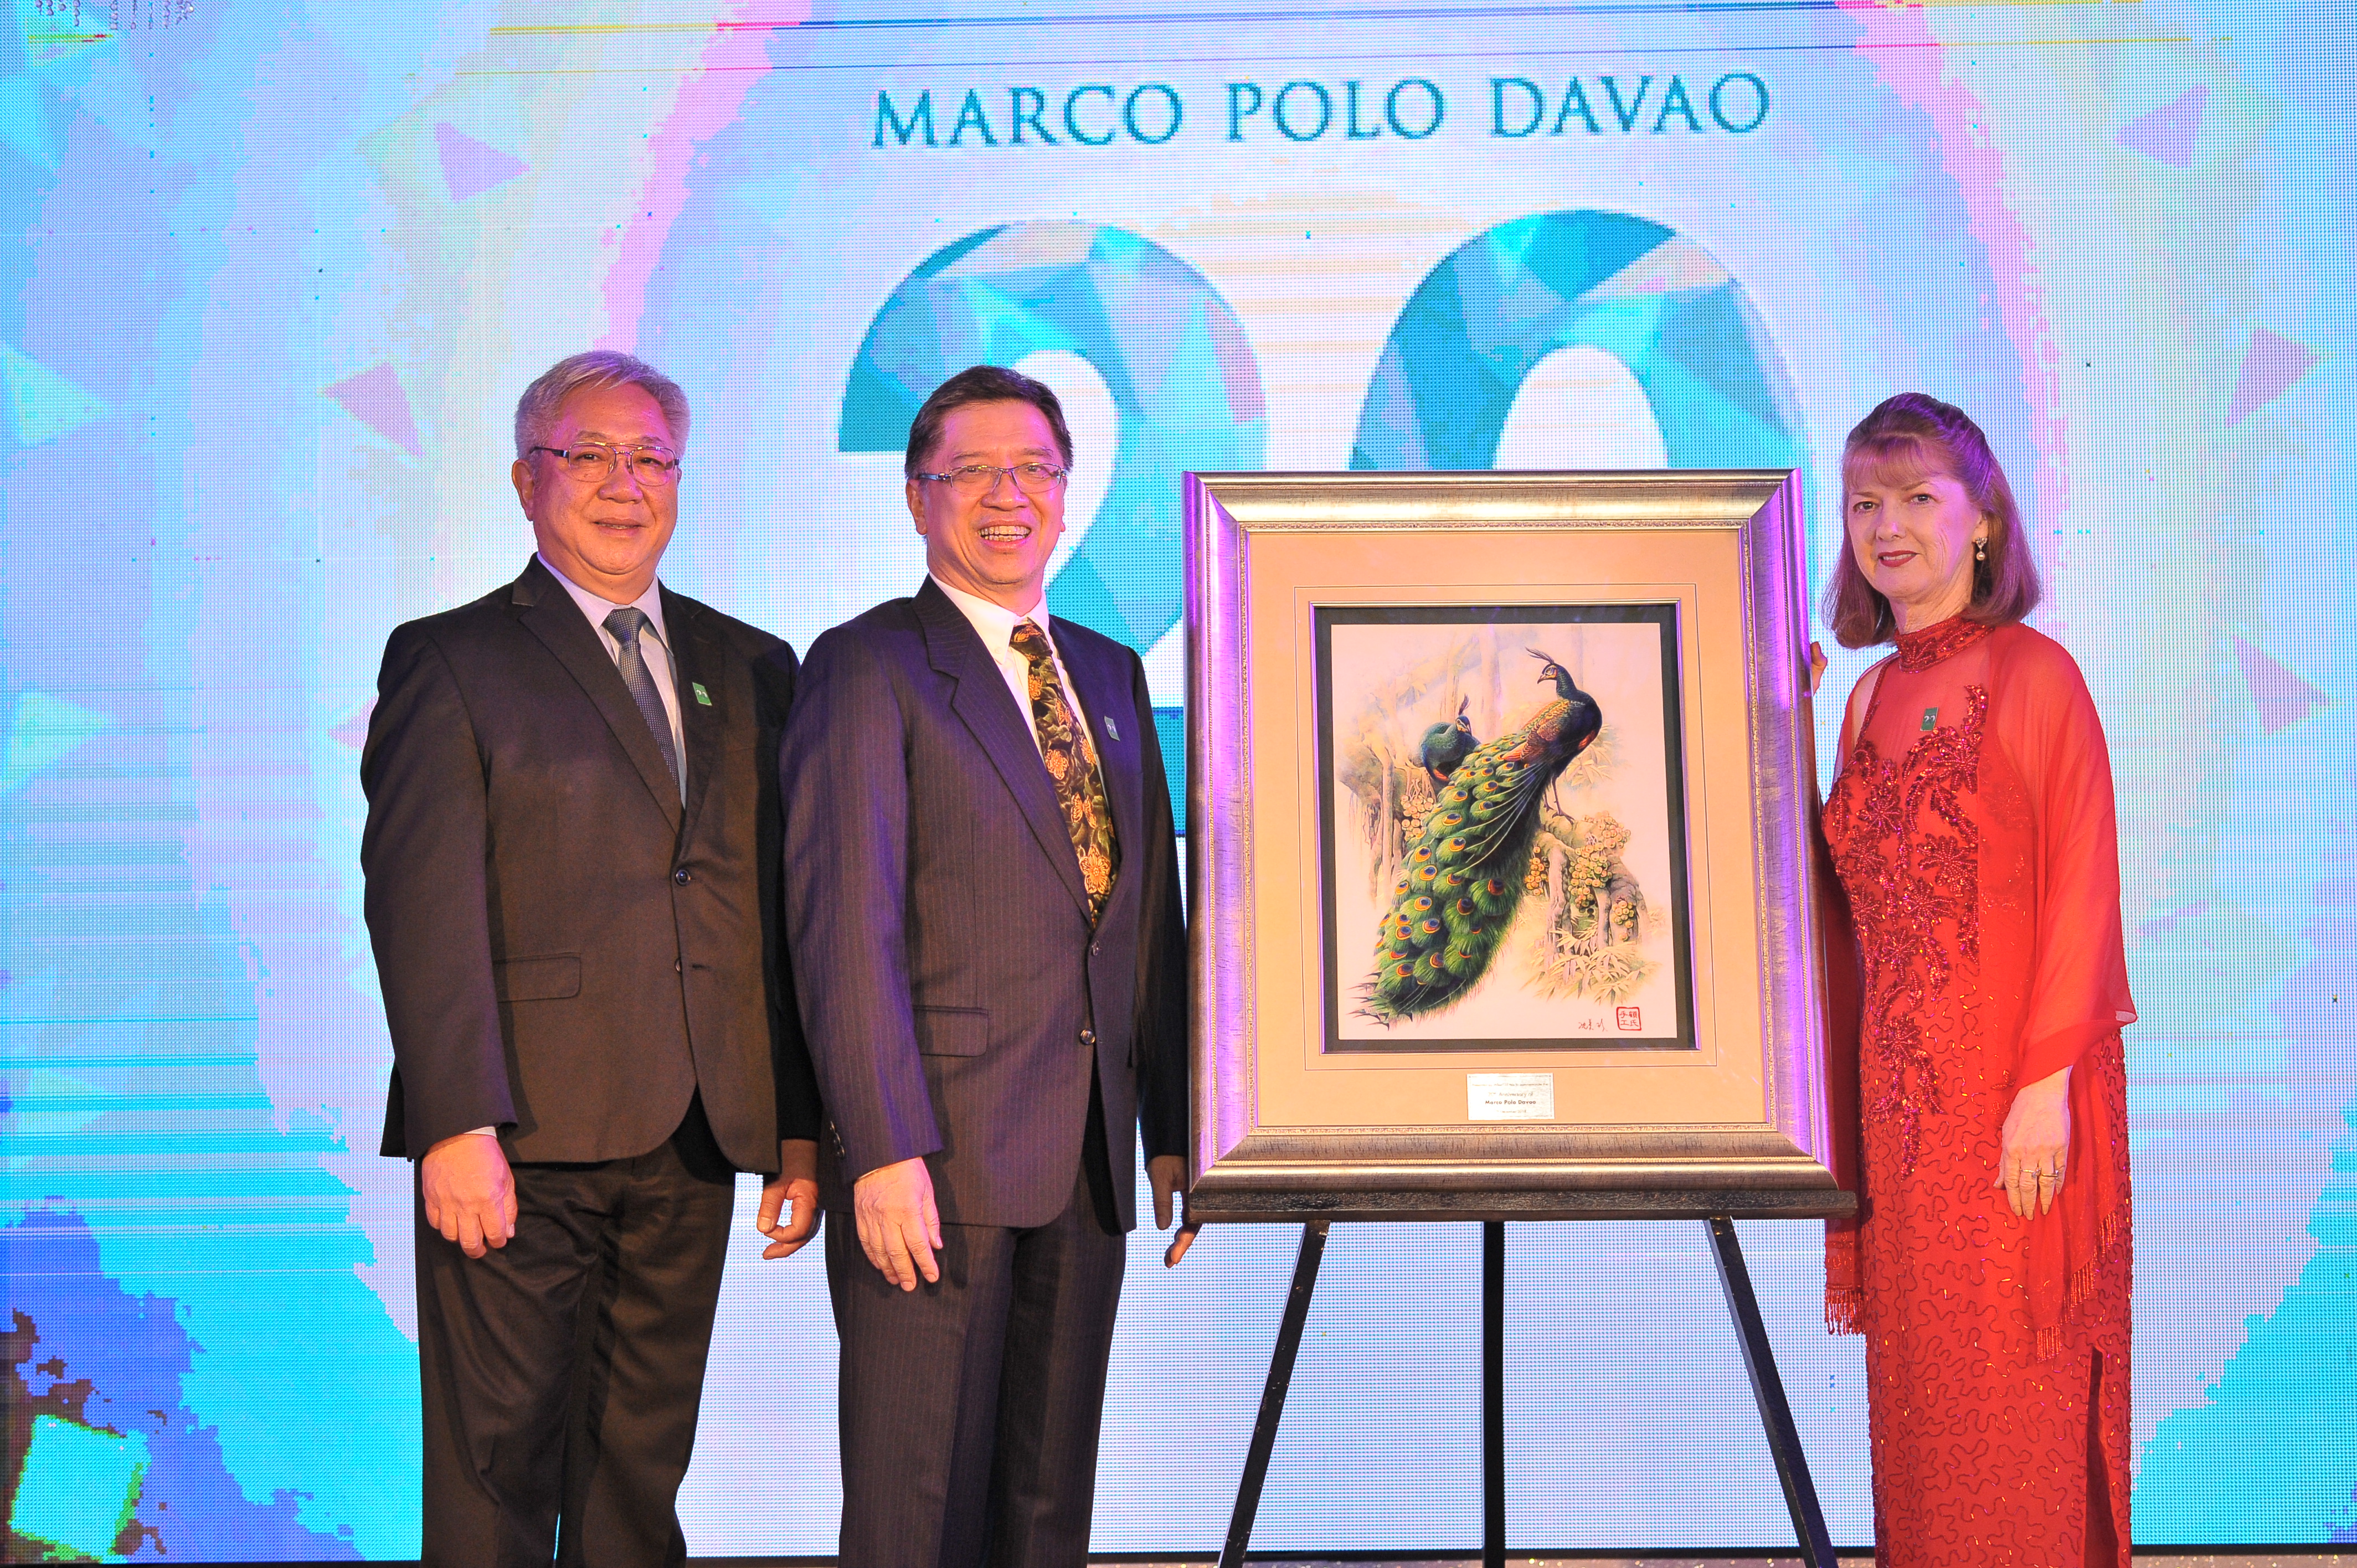 Celebrating 20 years of Marco Polo Davao